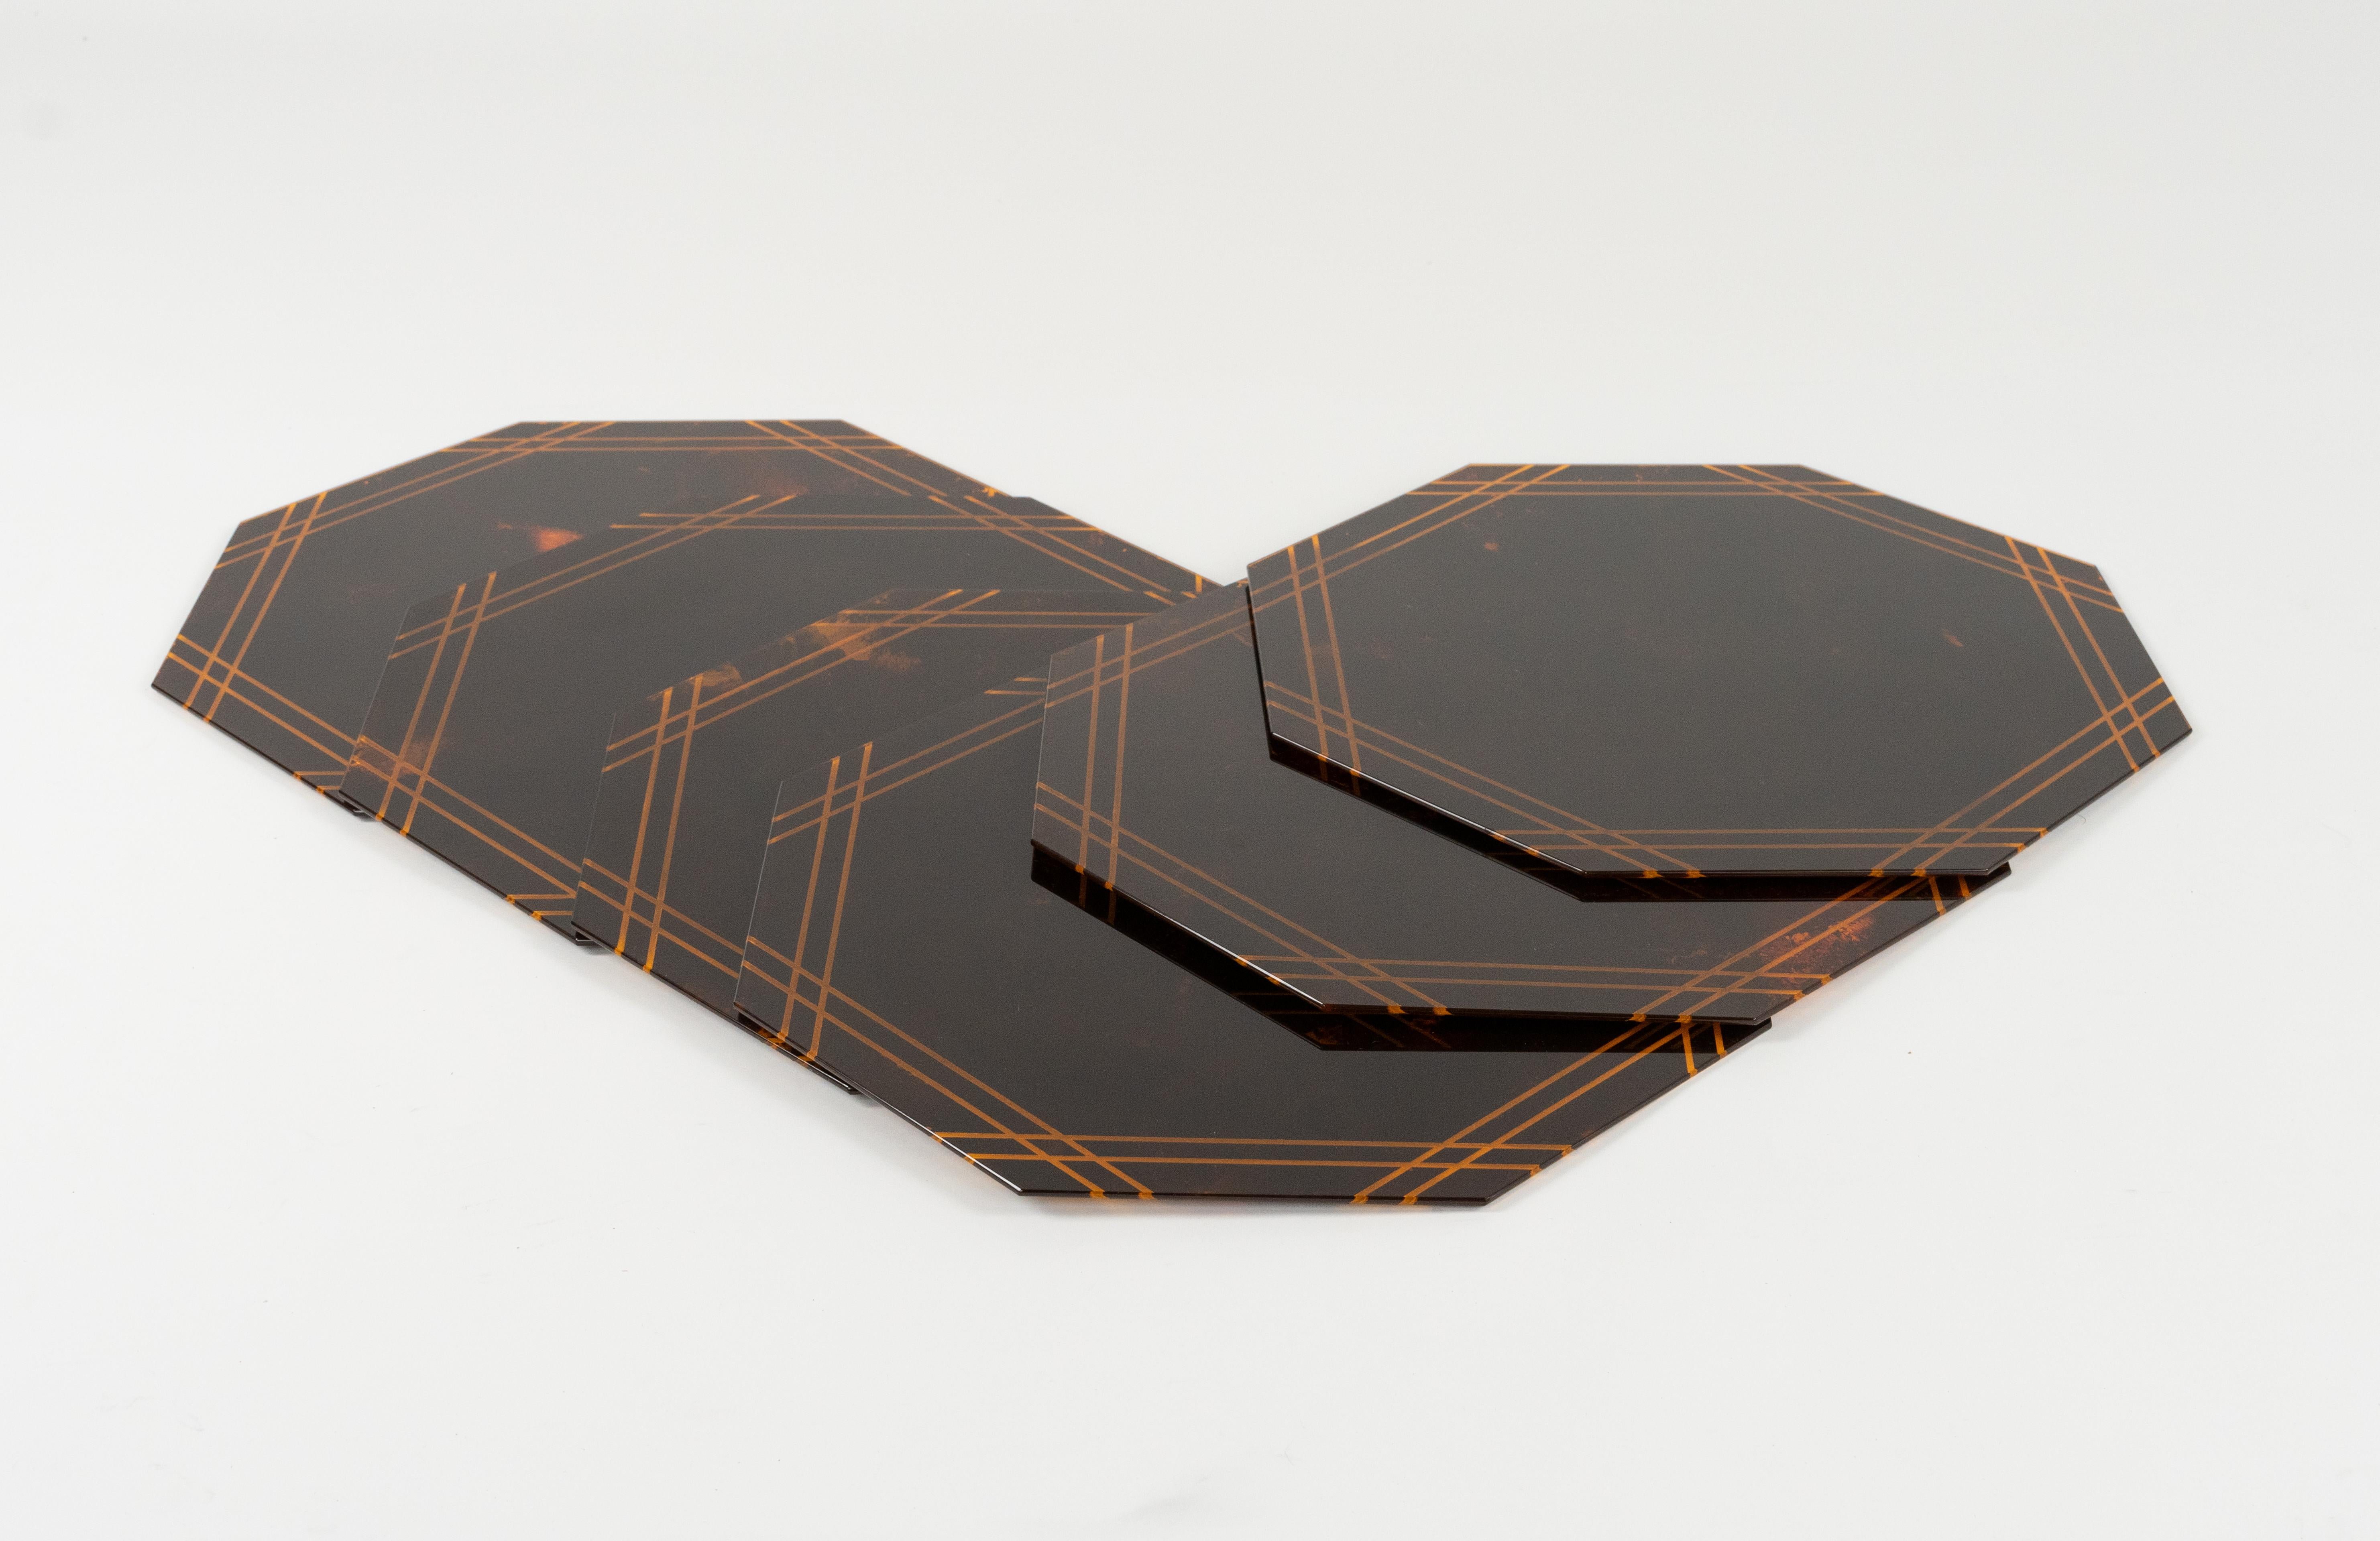 Acrylic Set of Eight Placemats Tortoiseshell Effect Lucite by Team Guzzini, Italy 1970s For Sale